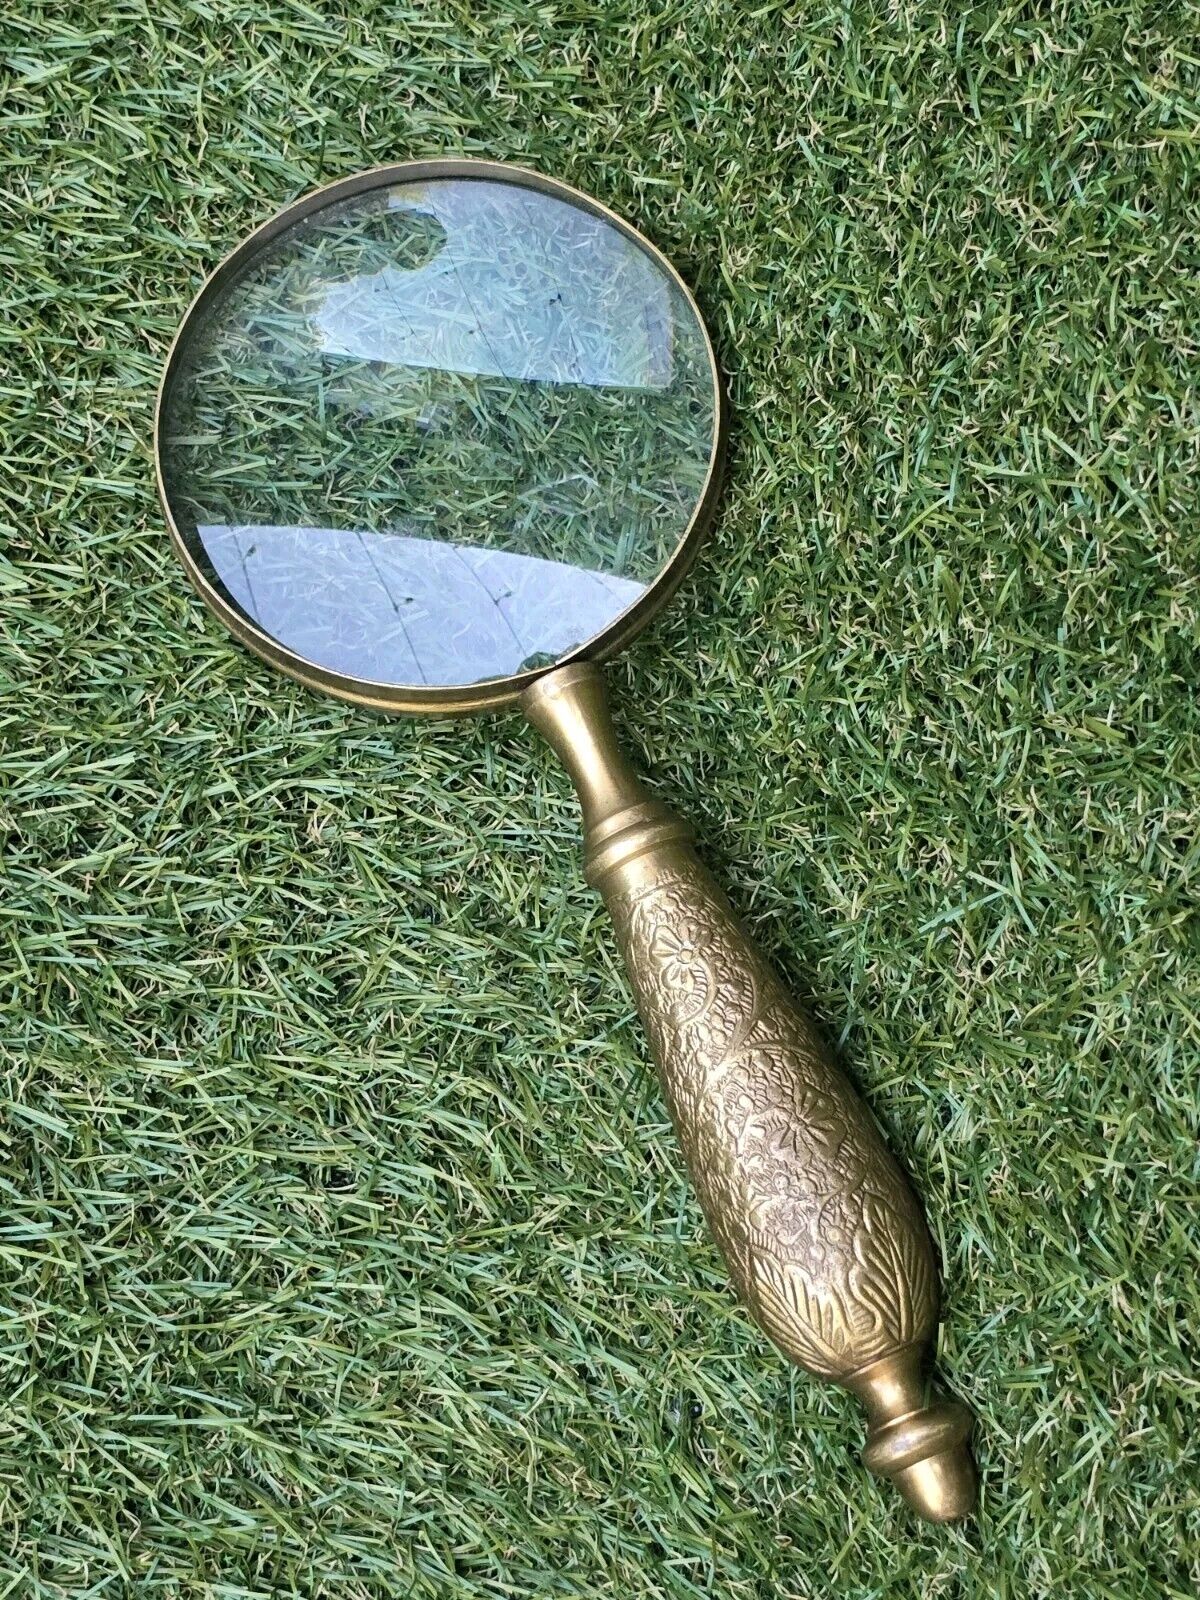 VINTAGE 10 inch BRASS HAND-HELD NAUTICAL 4 Inch MAGNIFYING GLASS - RARE